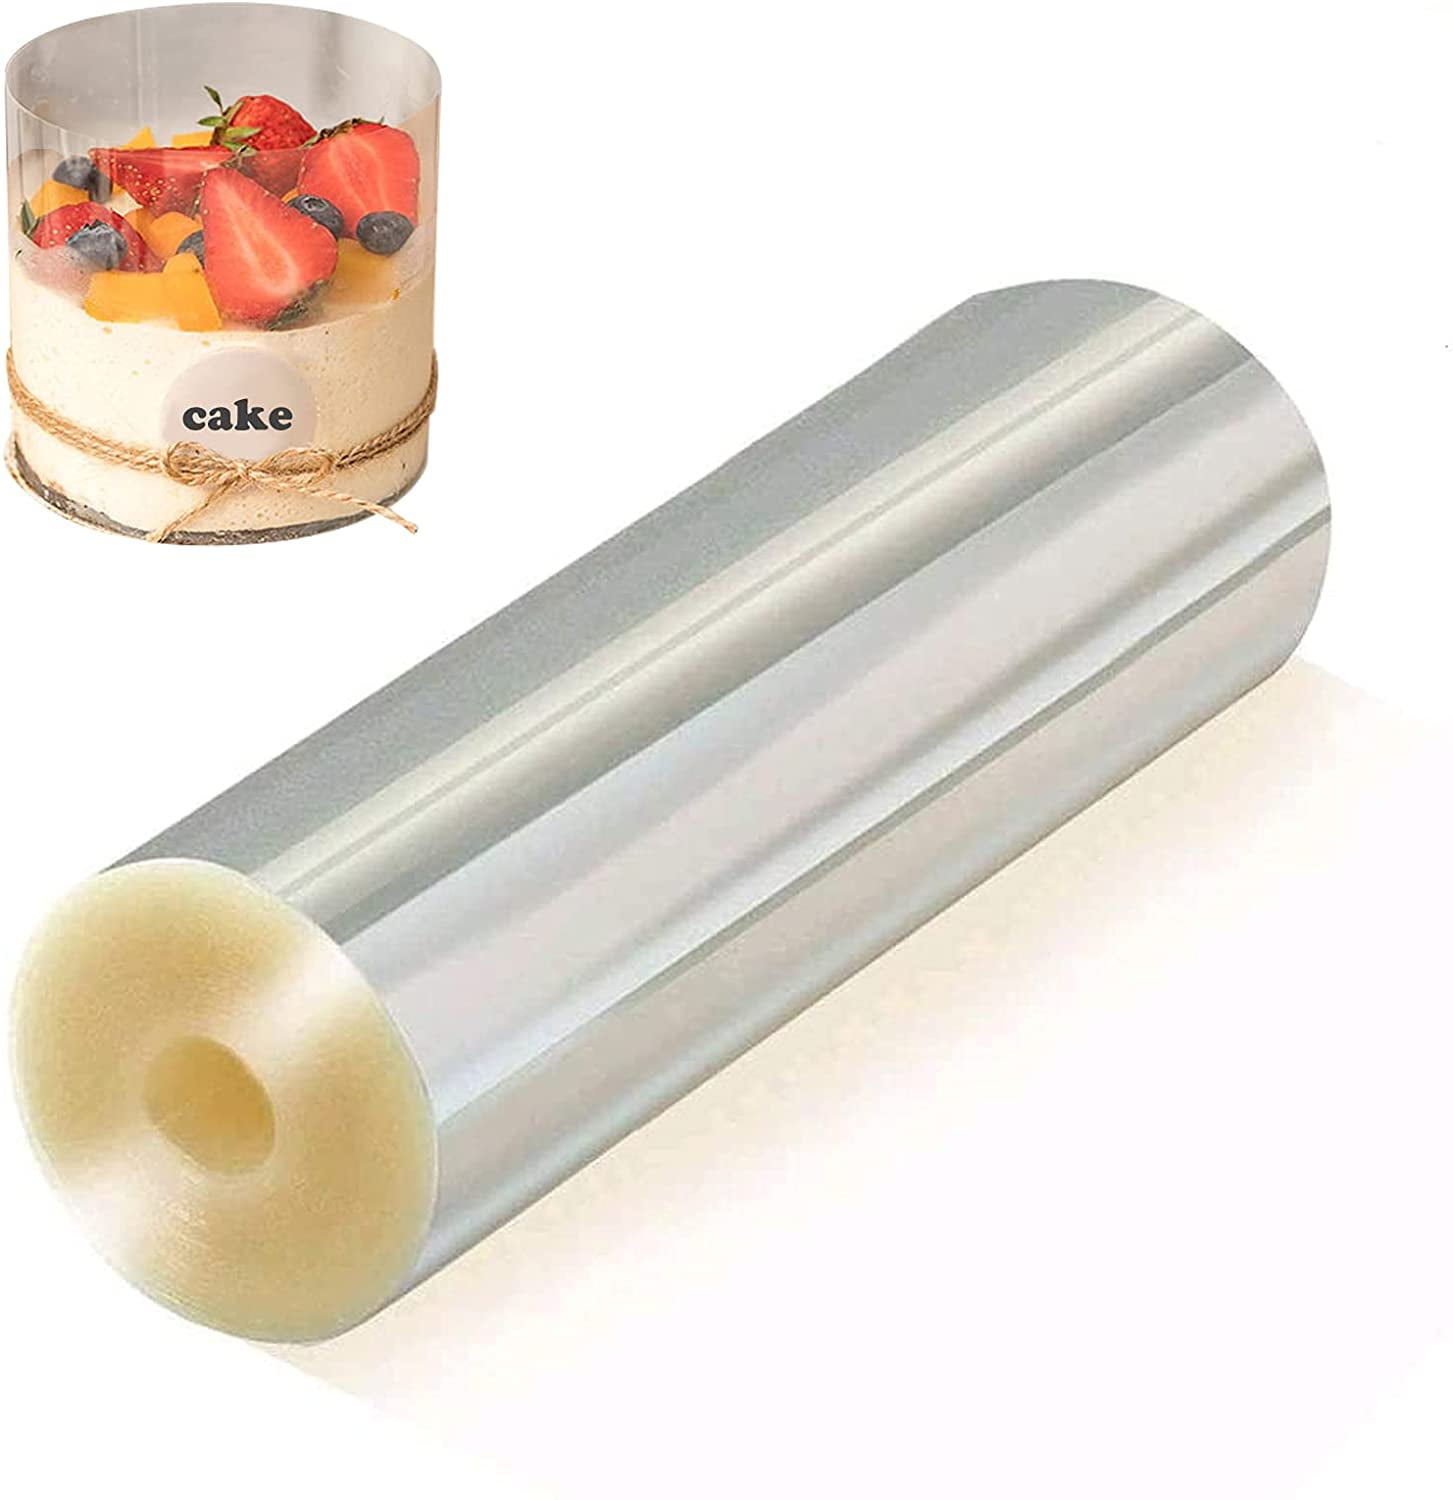  Gutsdoor Cake Collars 4 x 394inch, Acetate Rolls, Clear Cake  Mousse Strips, Transparent Cake Rolls, Cake Acetate Sheets for Chocolate  Mousse Baking Cake Decorating: Home & Kitchen